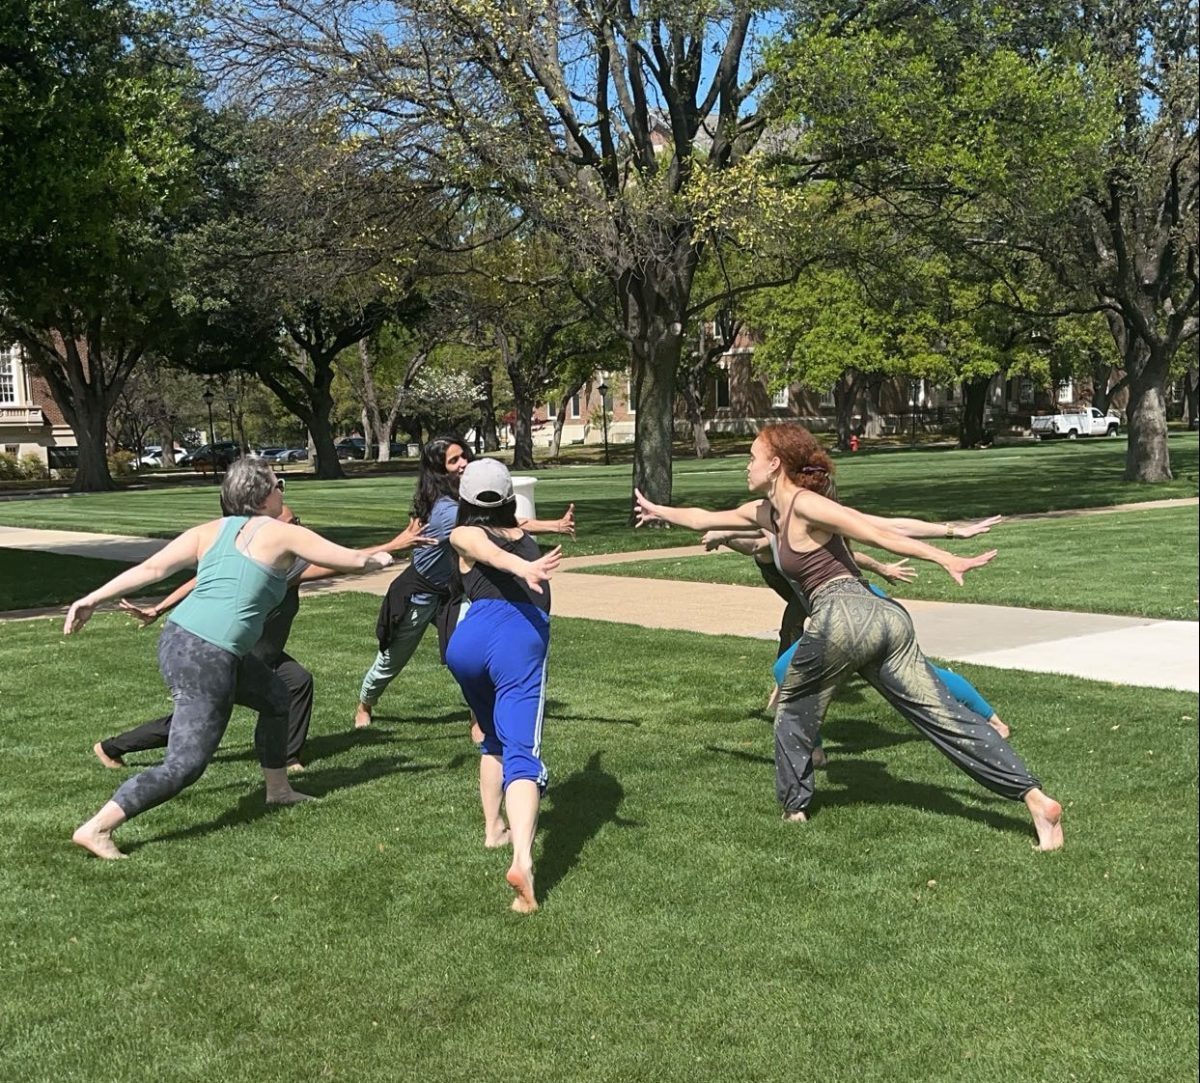 Time Lapse Dance prides in implementing ecology into their choreography. In this image, the dancers are demonstrating the connectedness that both humans and nature experience.